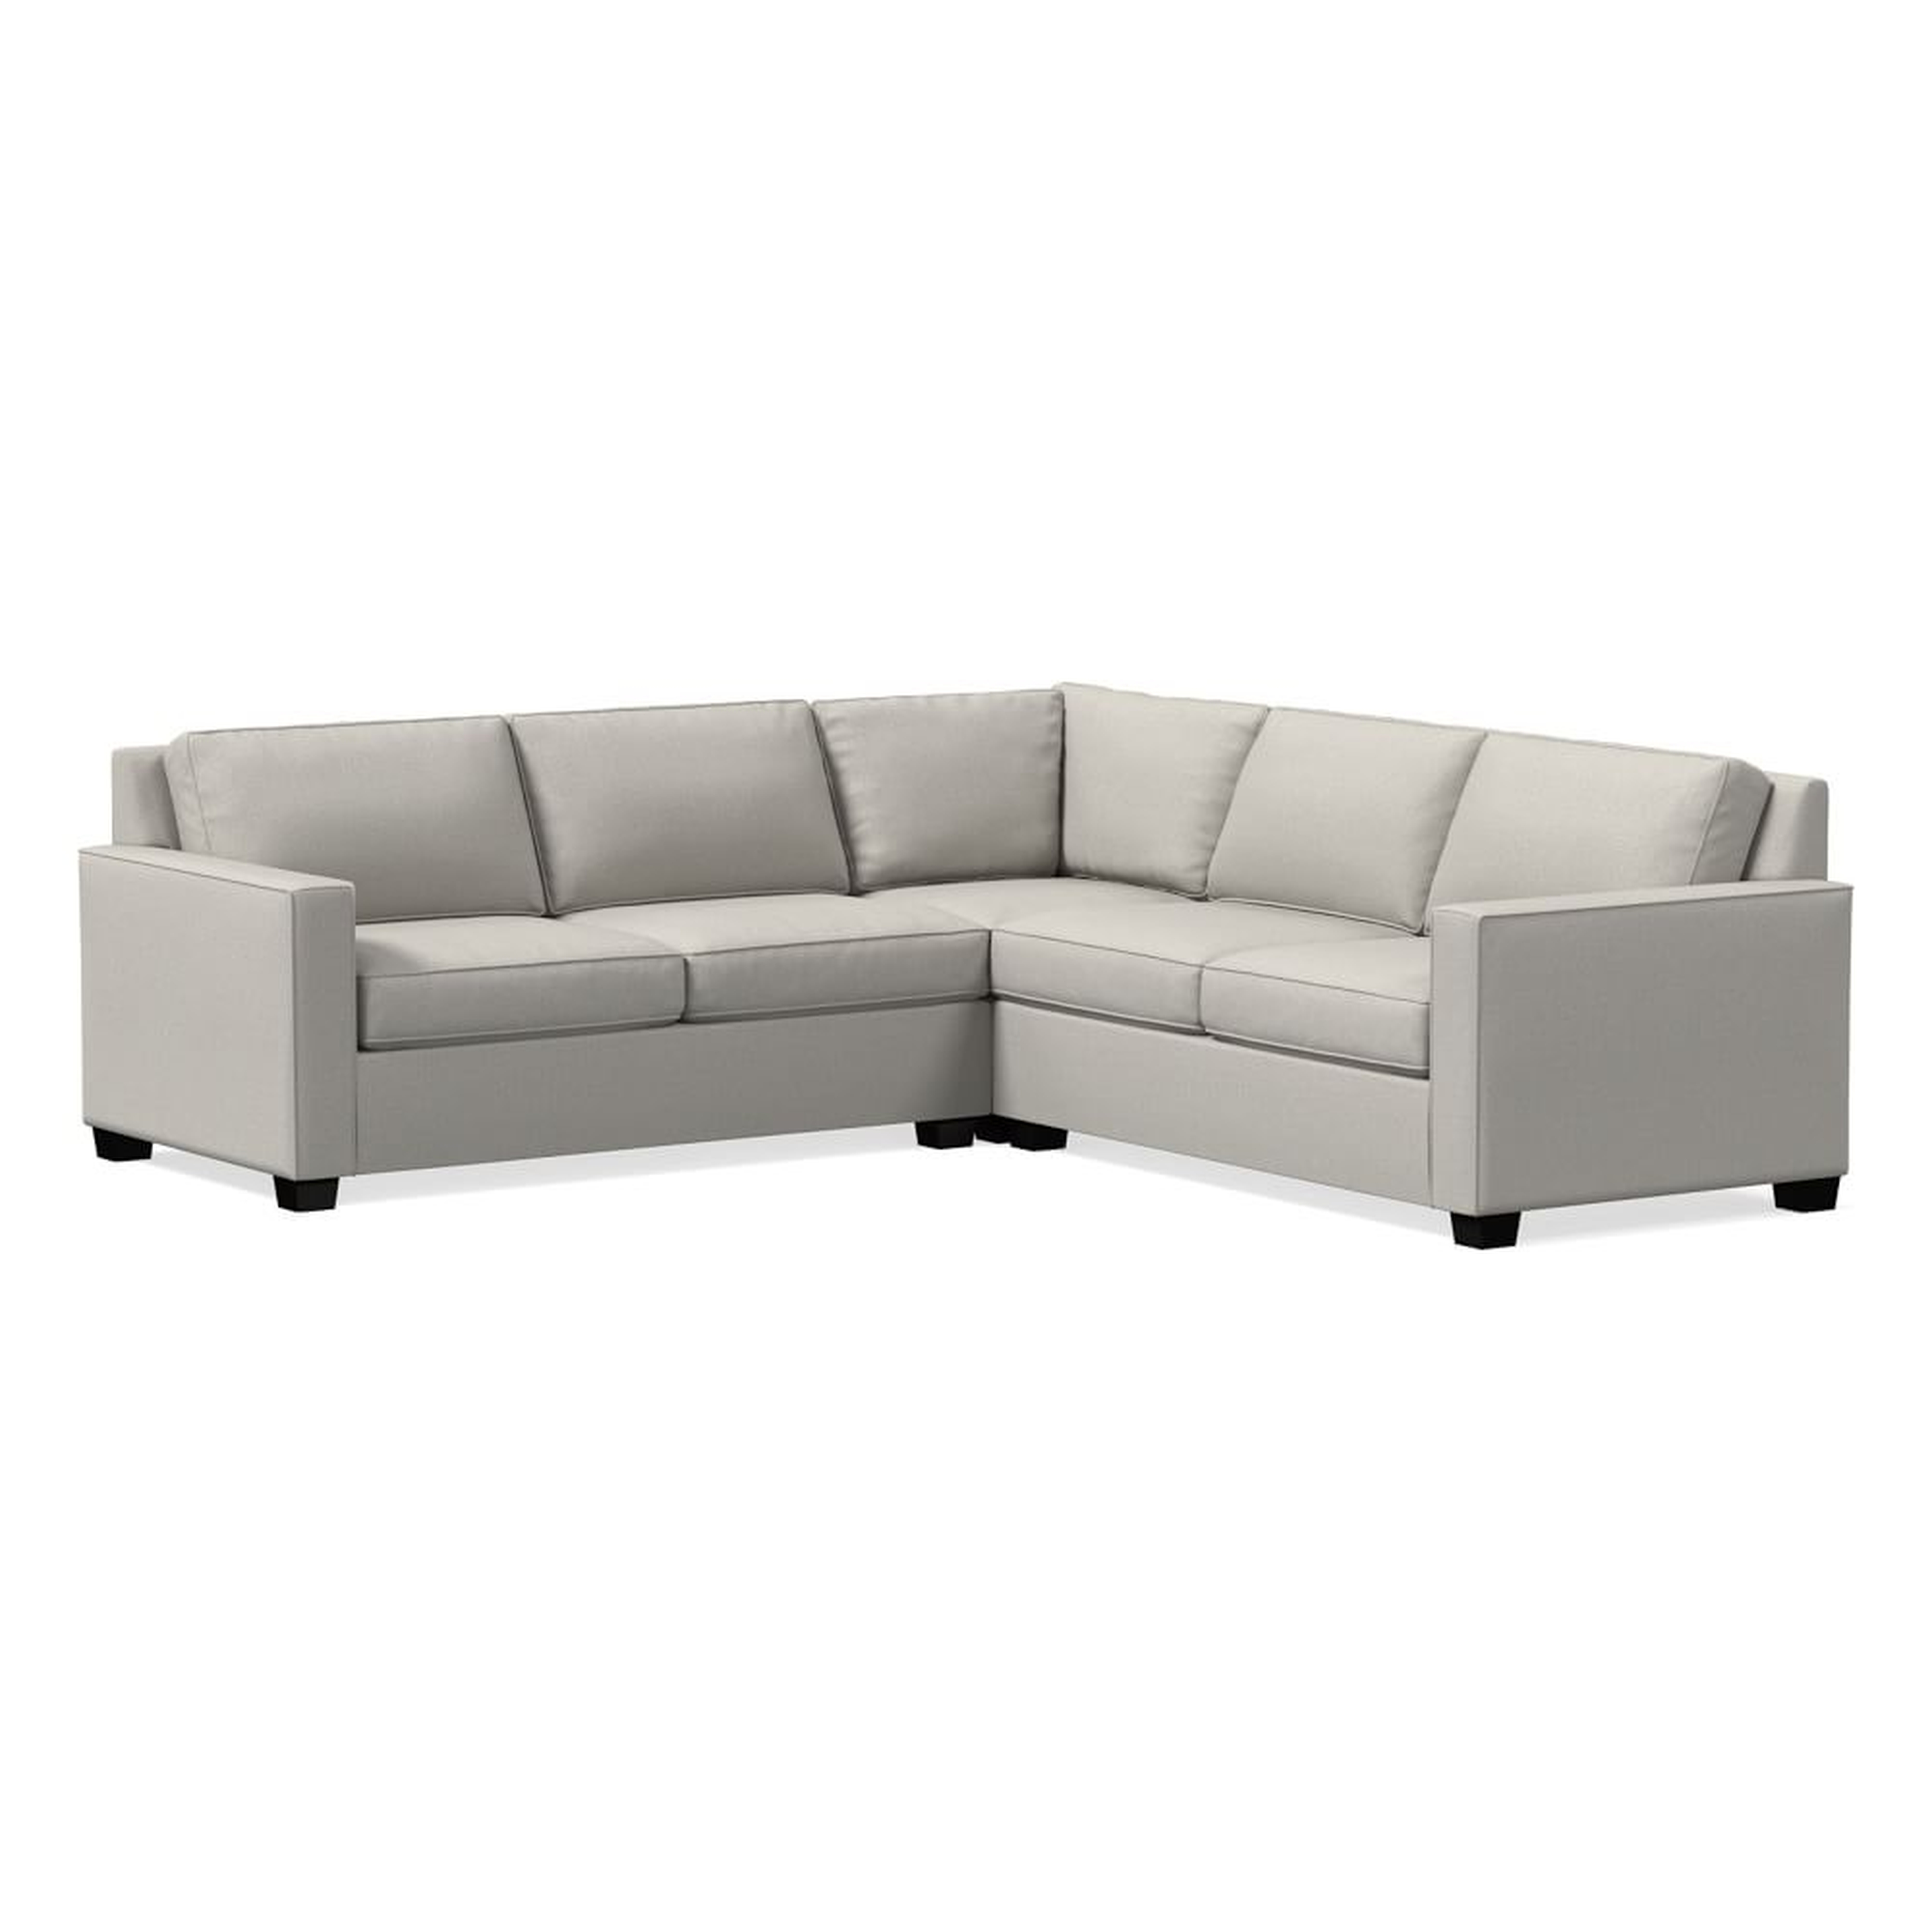 Henry 101" Multi Seat 3-Piece L-Shaped Sectional, Performance Yarn Dyed Linen Weave, Frost Gray, Chocolate - West Elm